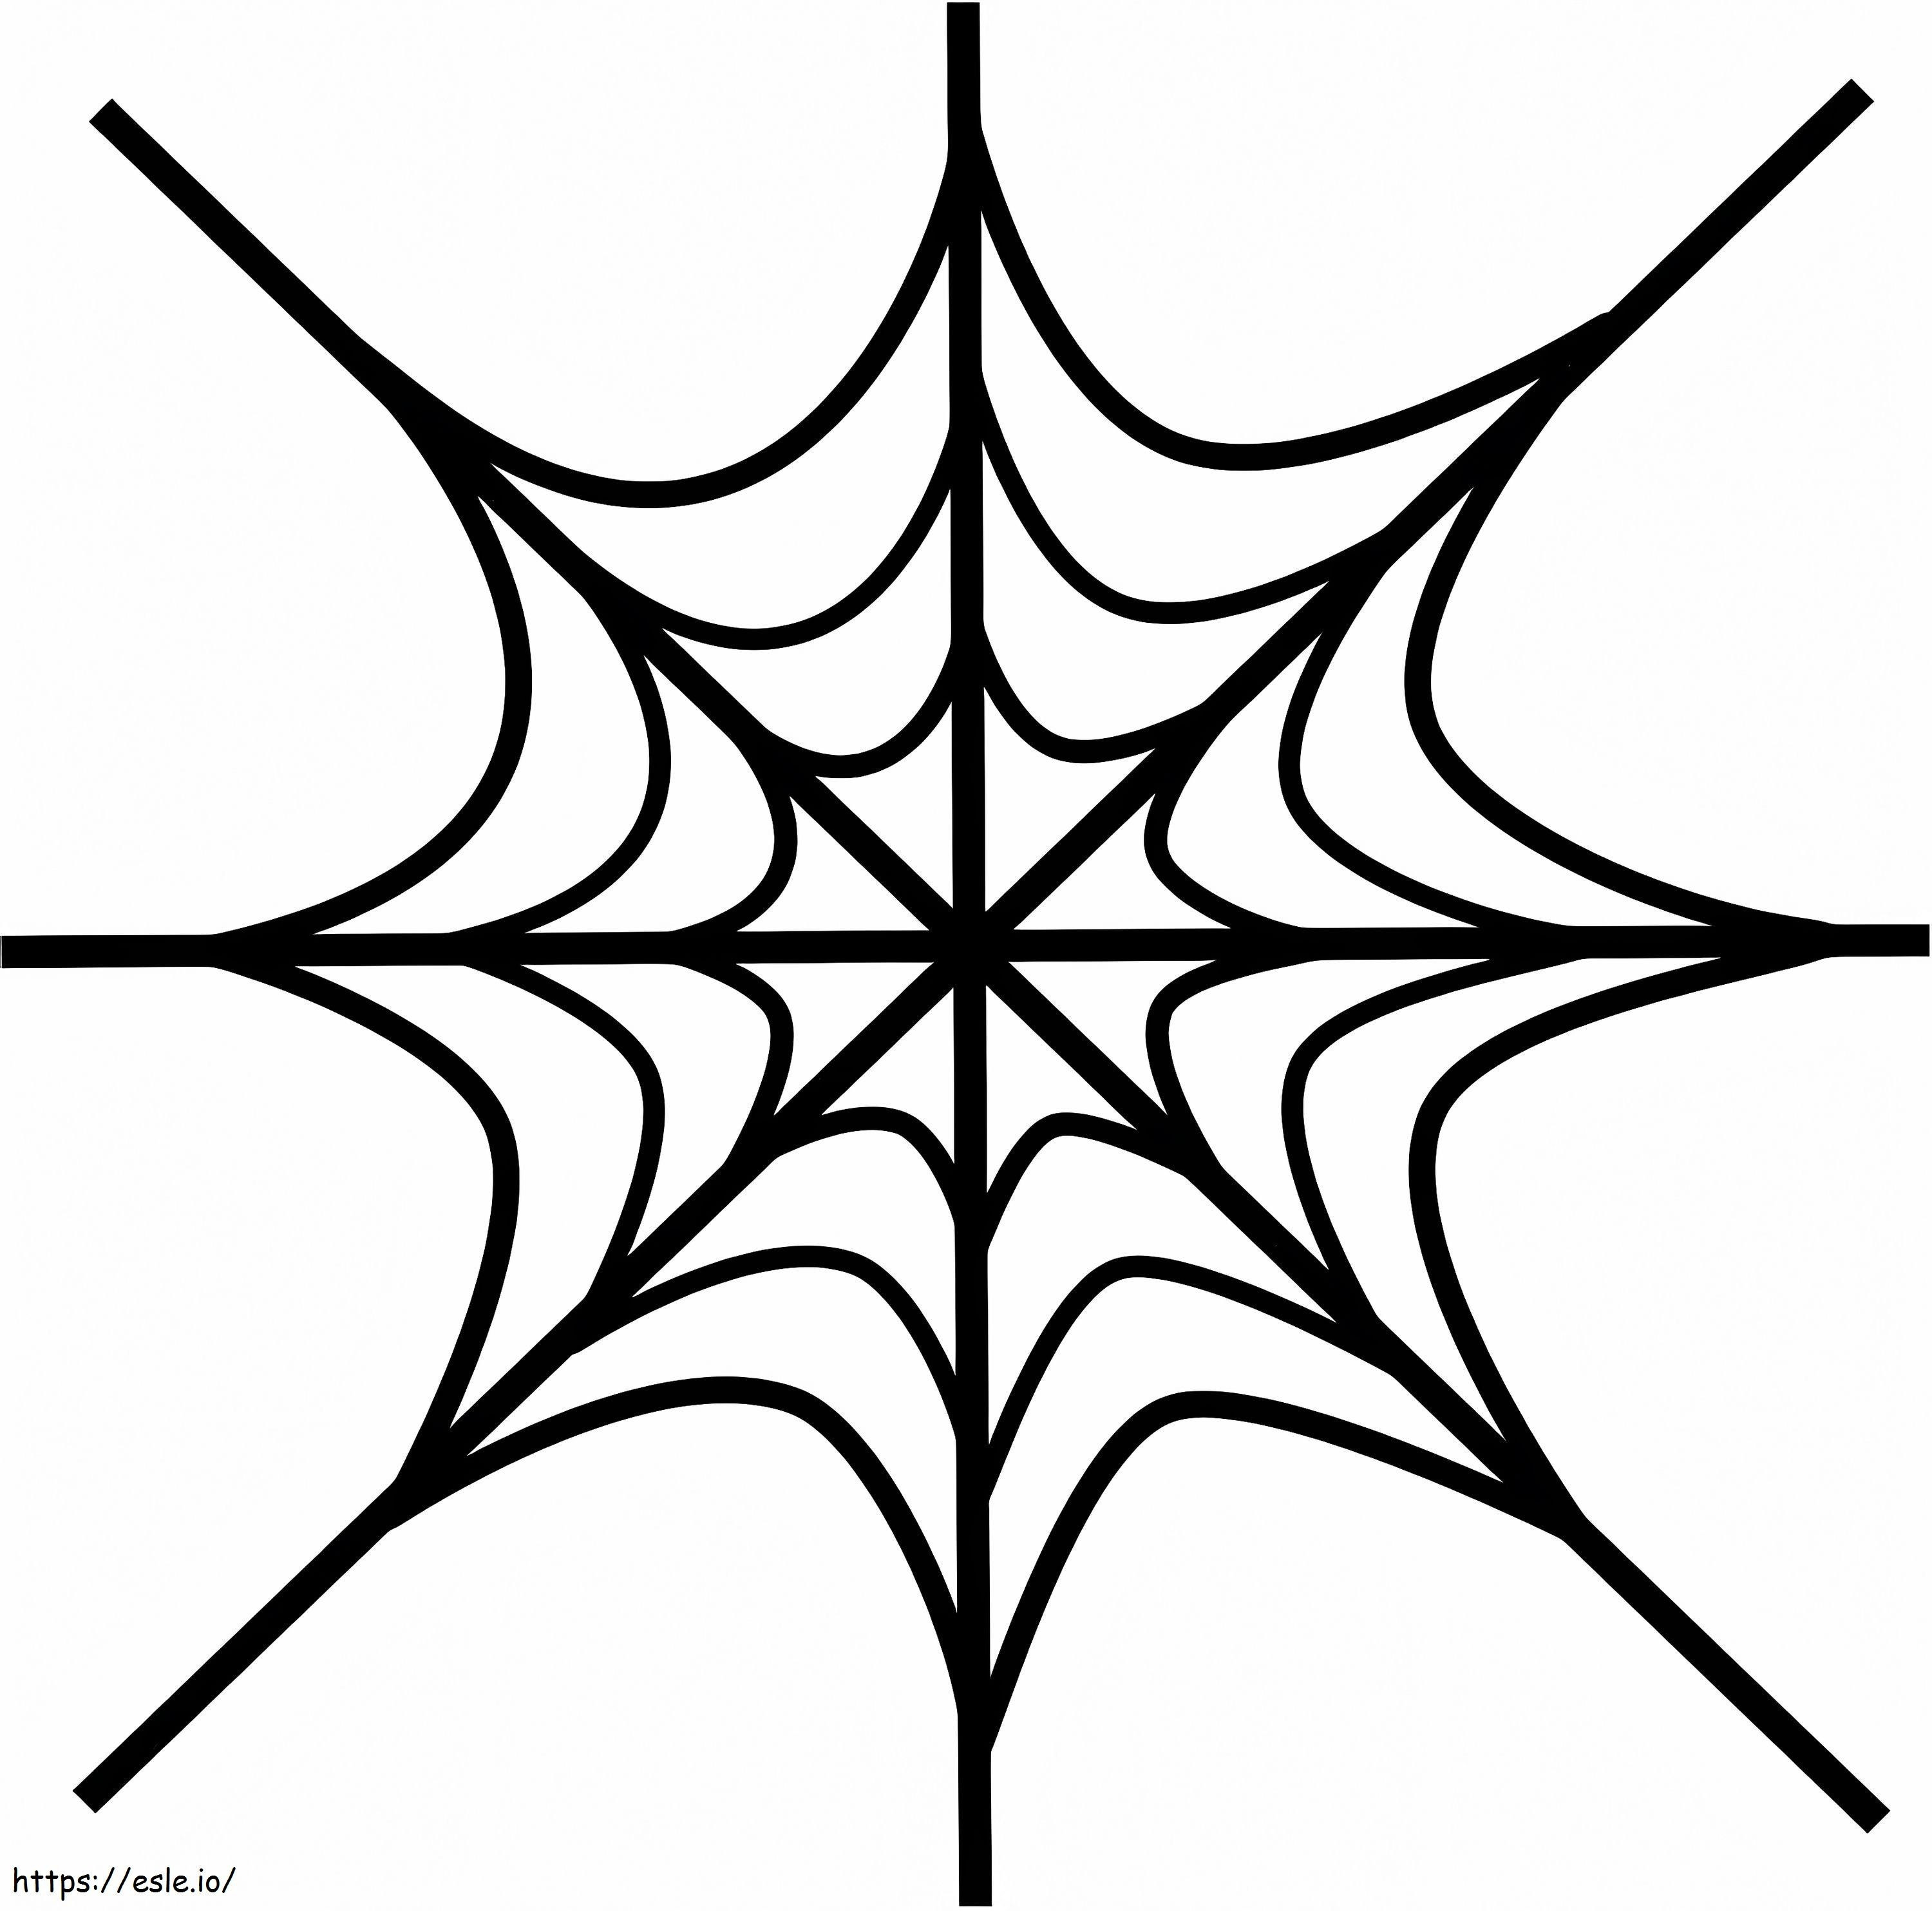 Simple Spider Web coloring page